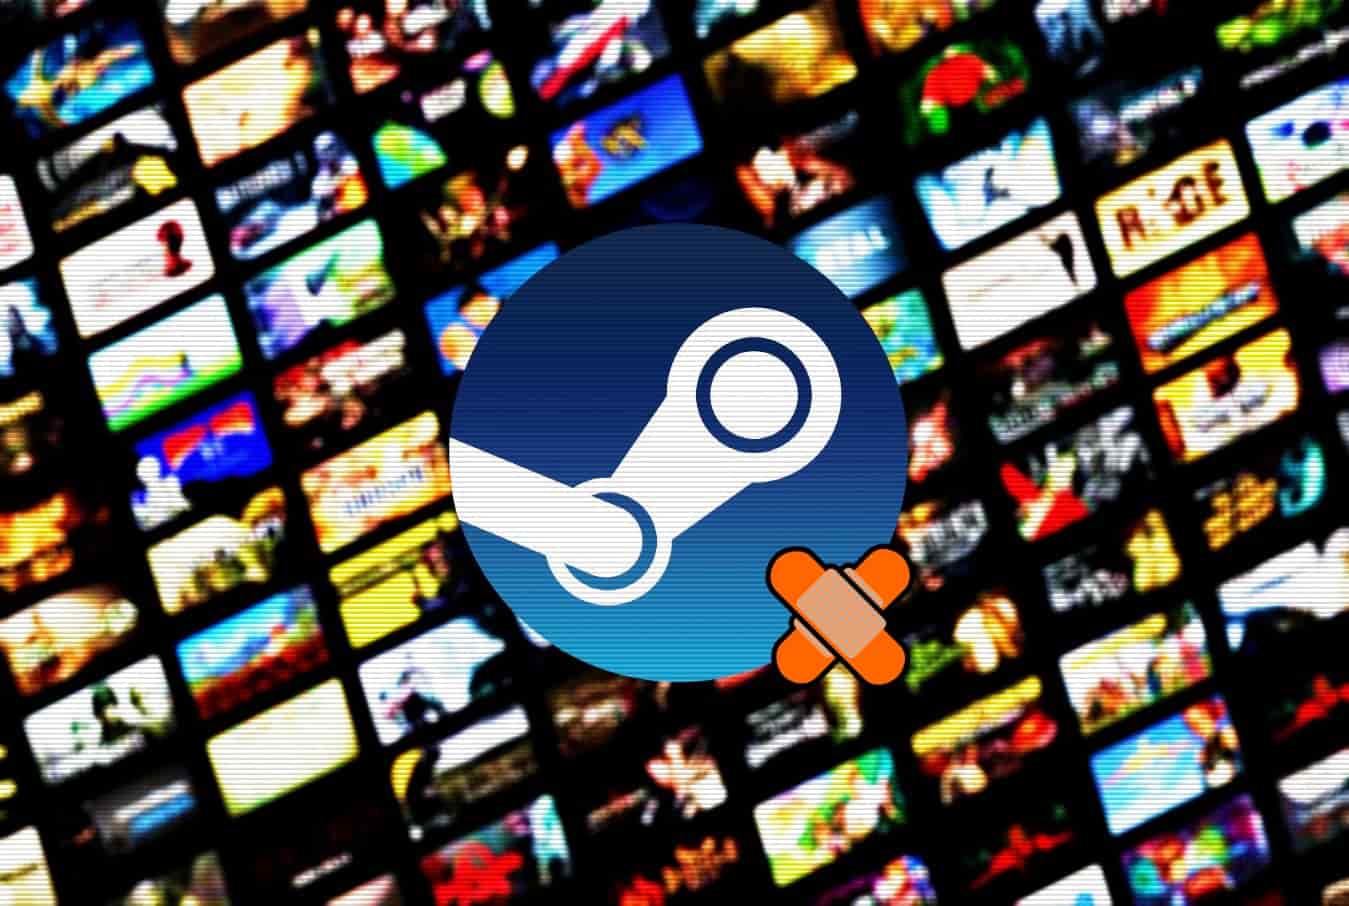 Steam vulnerabilities allowed remote take over of users' computers